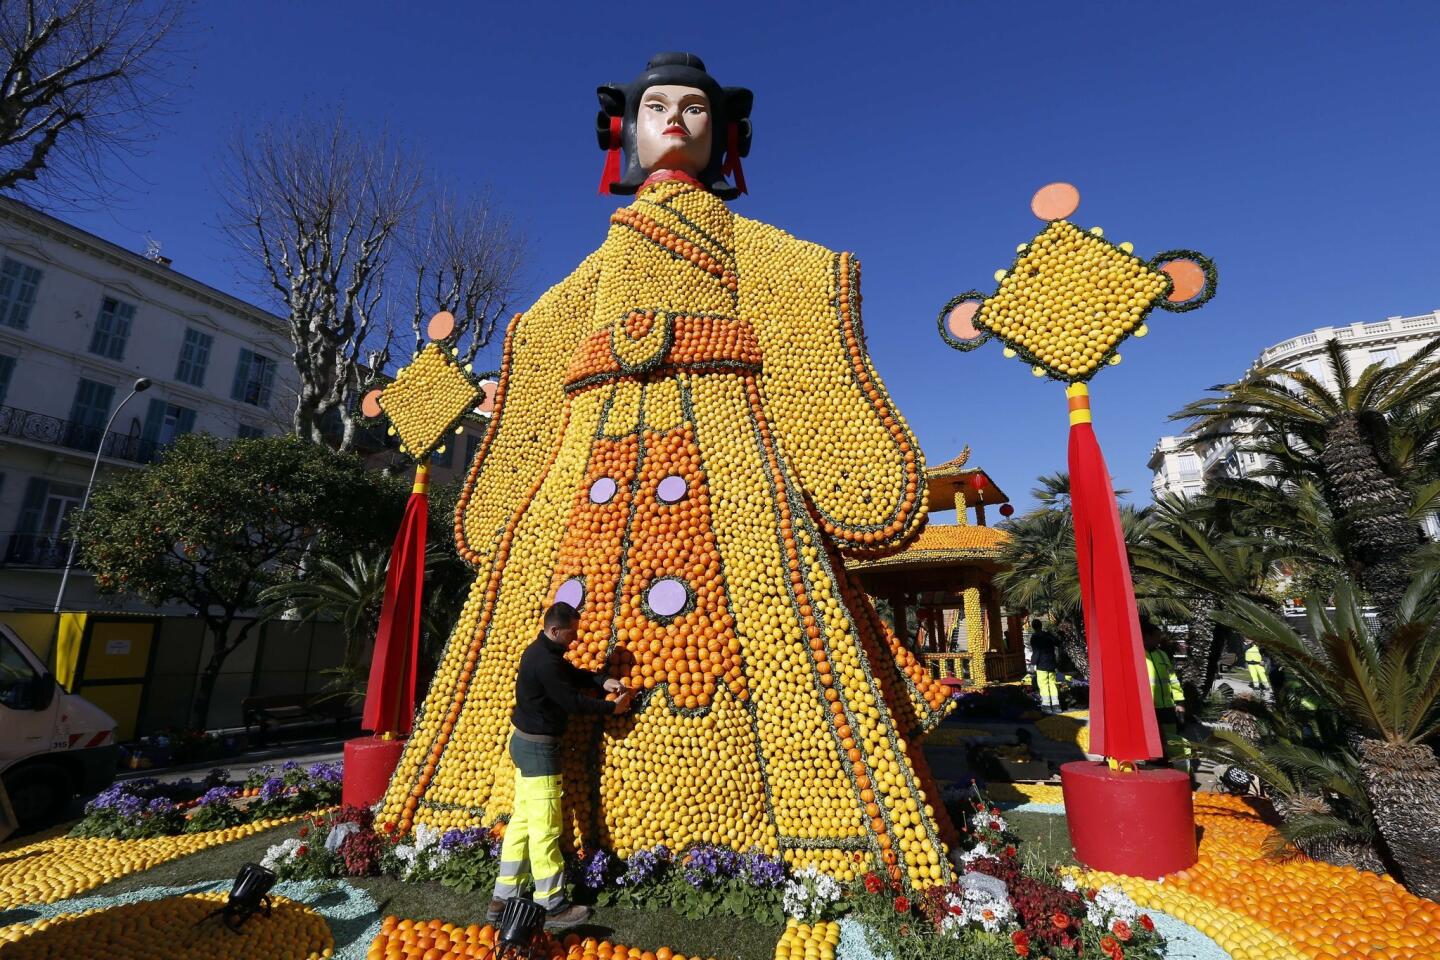 People work on a sculpture, made of oranges and lemons in Menton on the French Riviera, ahead of the start of the "Fete du Citron".